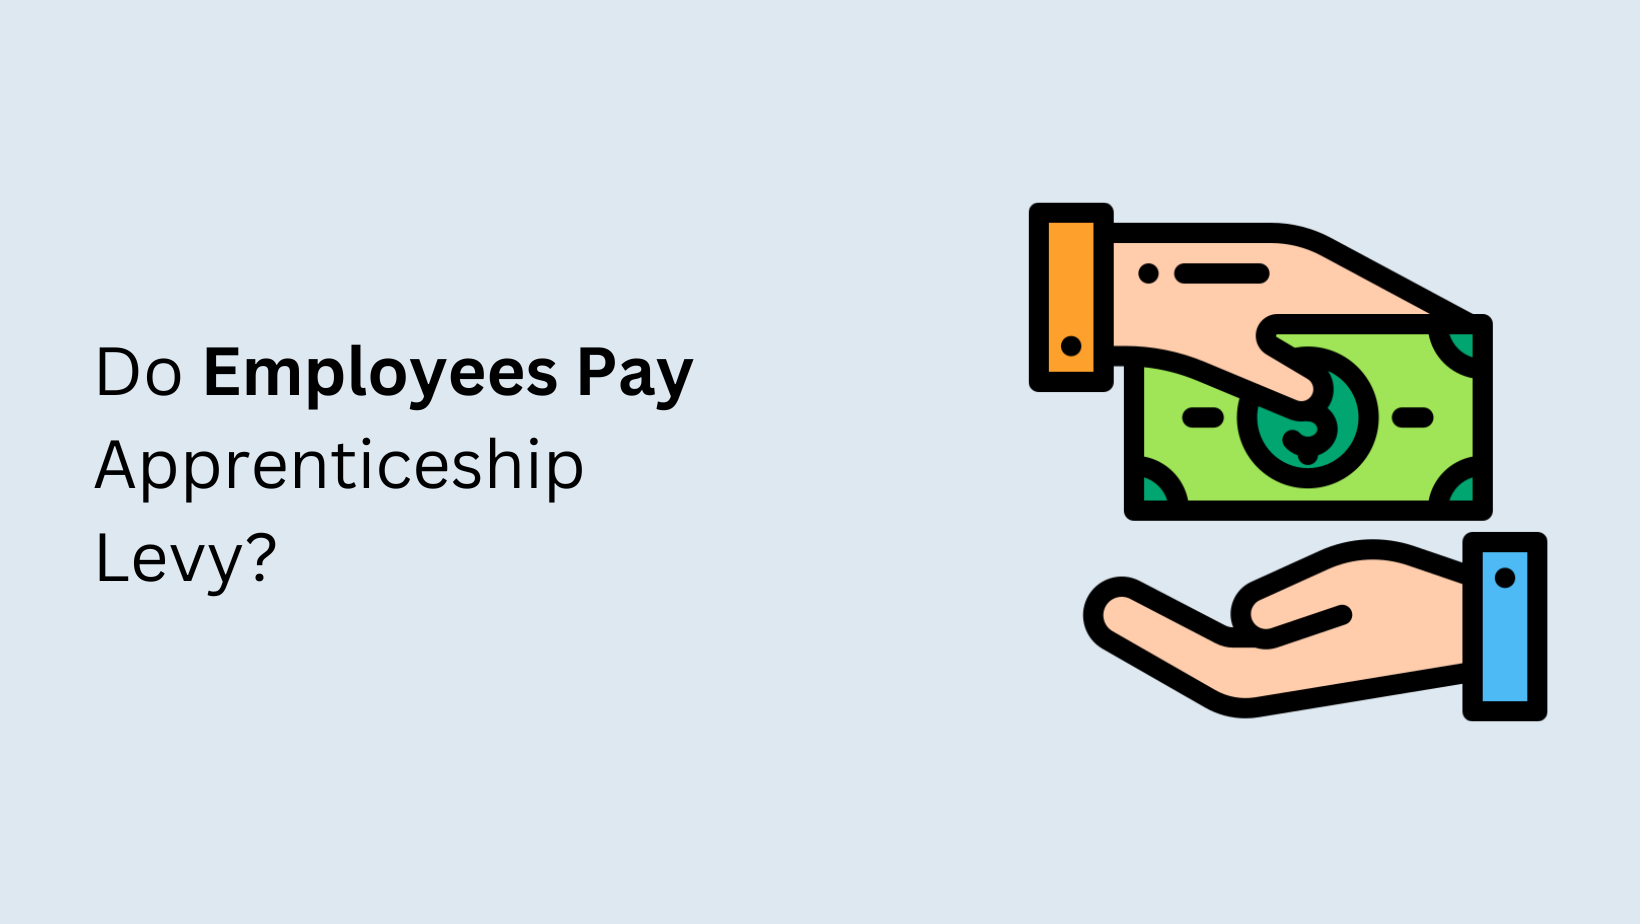 Do Employees Pay Apprenticeship Levy